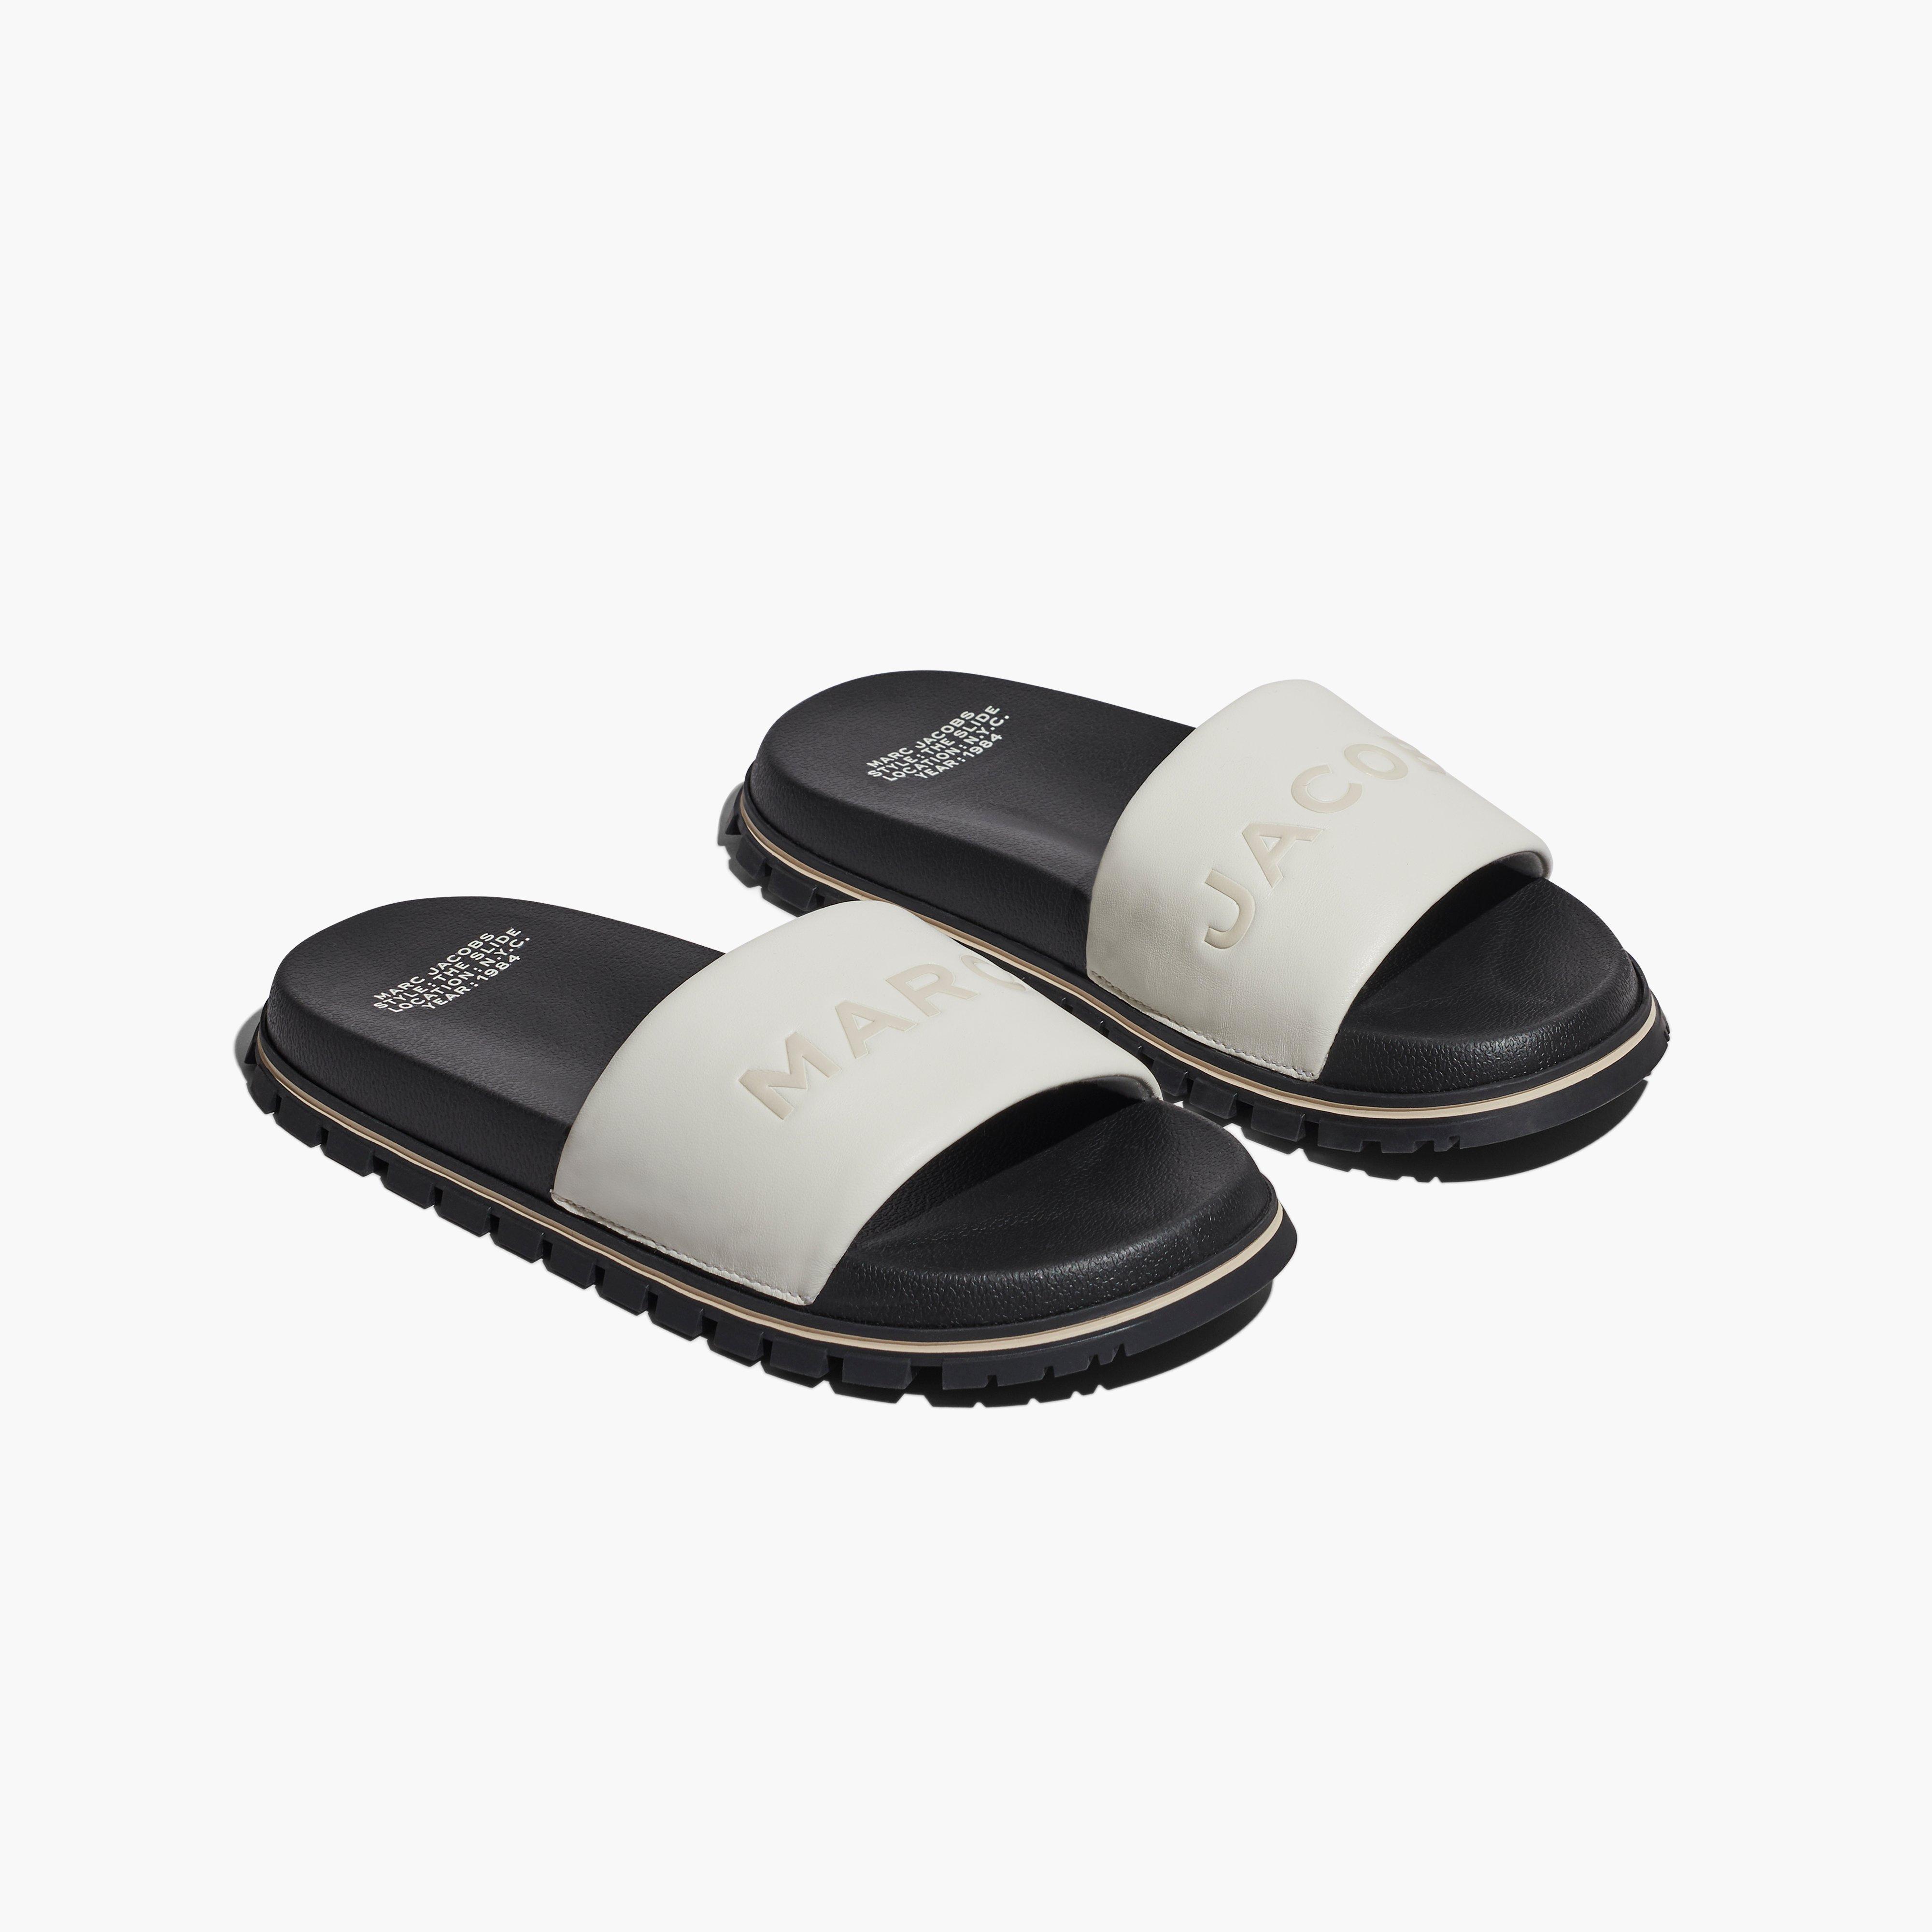 Marc by Marc jacobs The Slide,COTTON WHITE